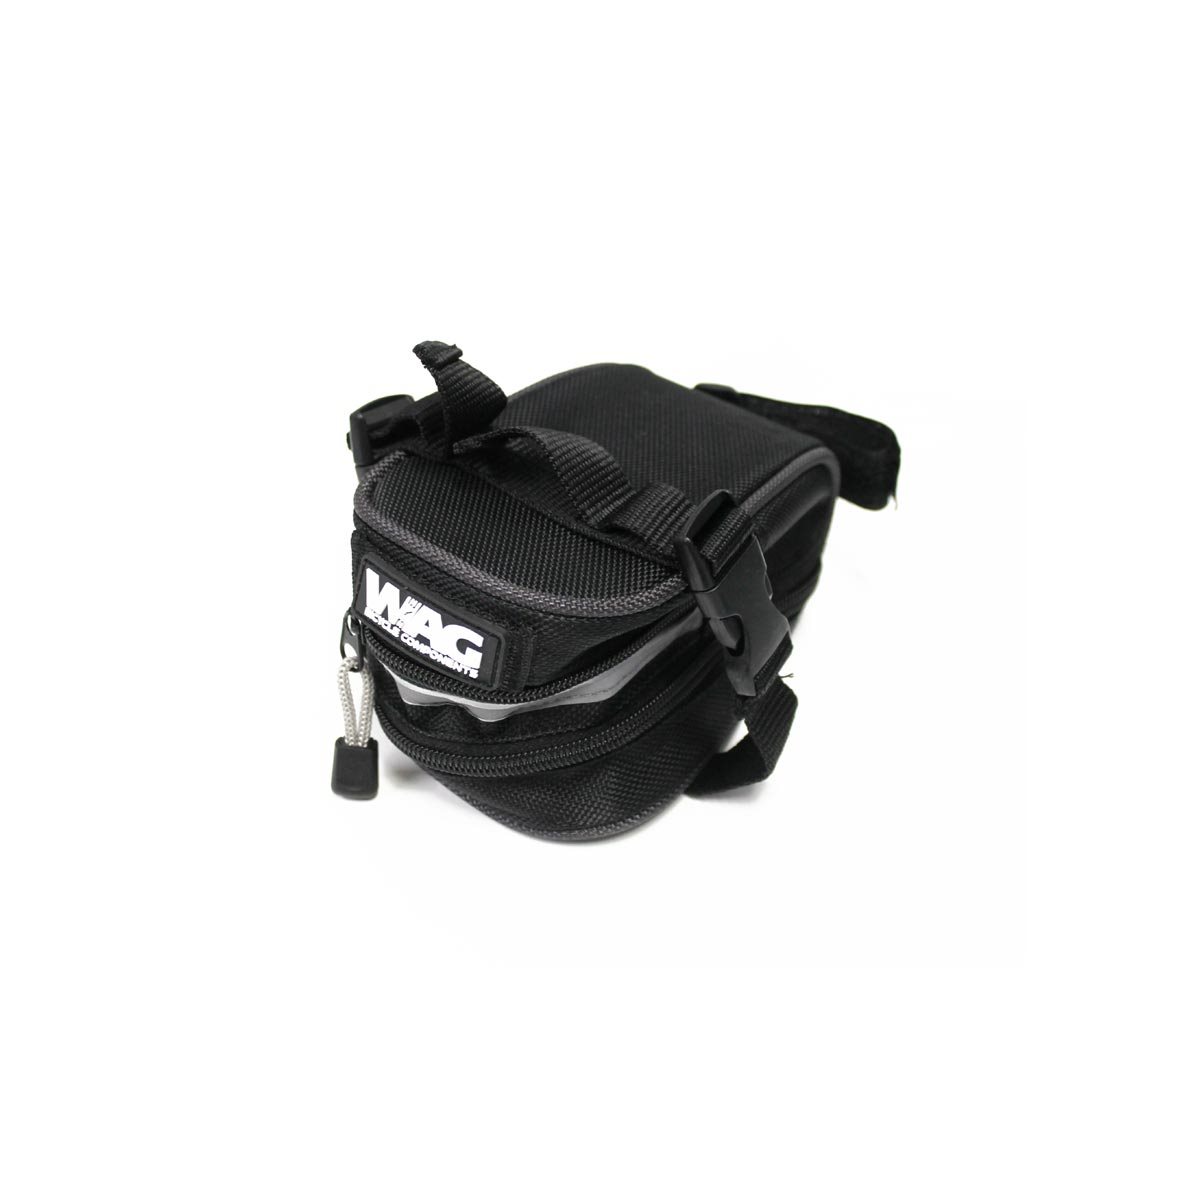 expandable mtb saddle bag with quick release and straps strap